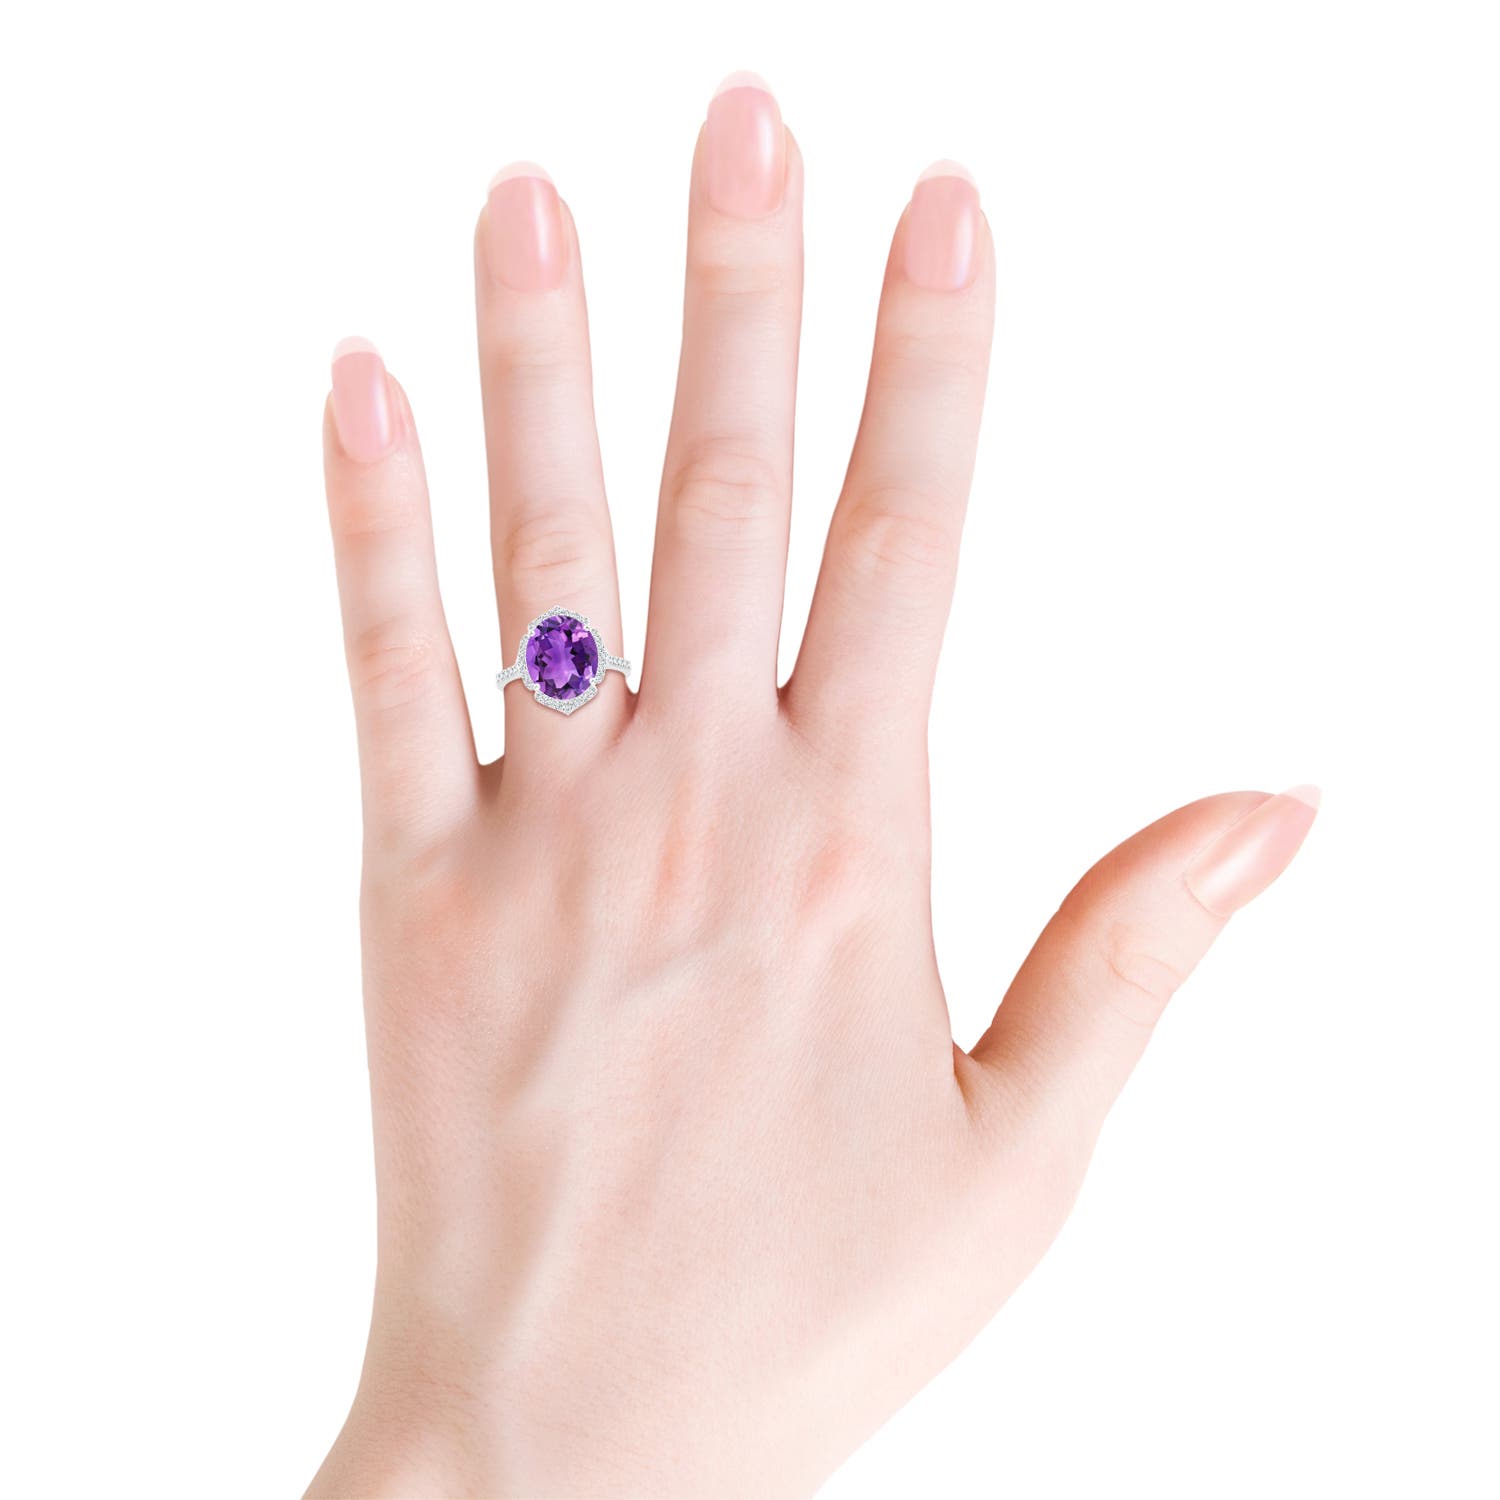 AAA - Amethyst / 4.59 CT / 14 KT White Gold